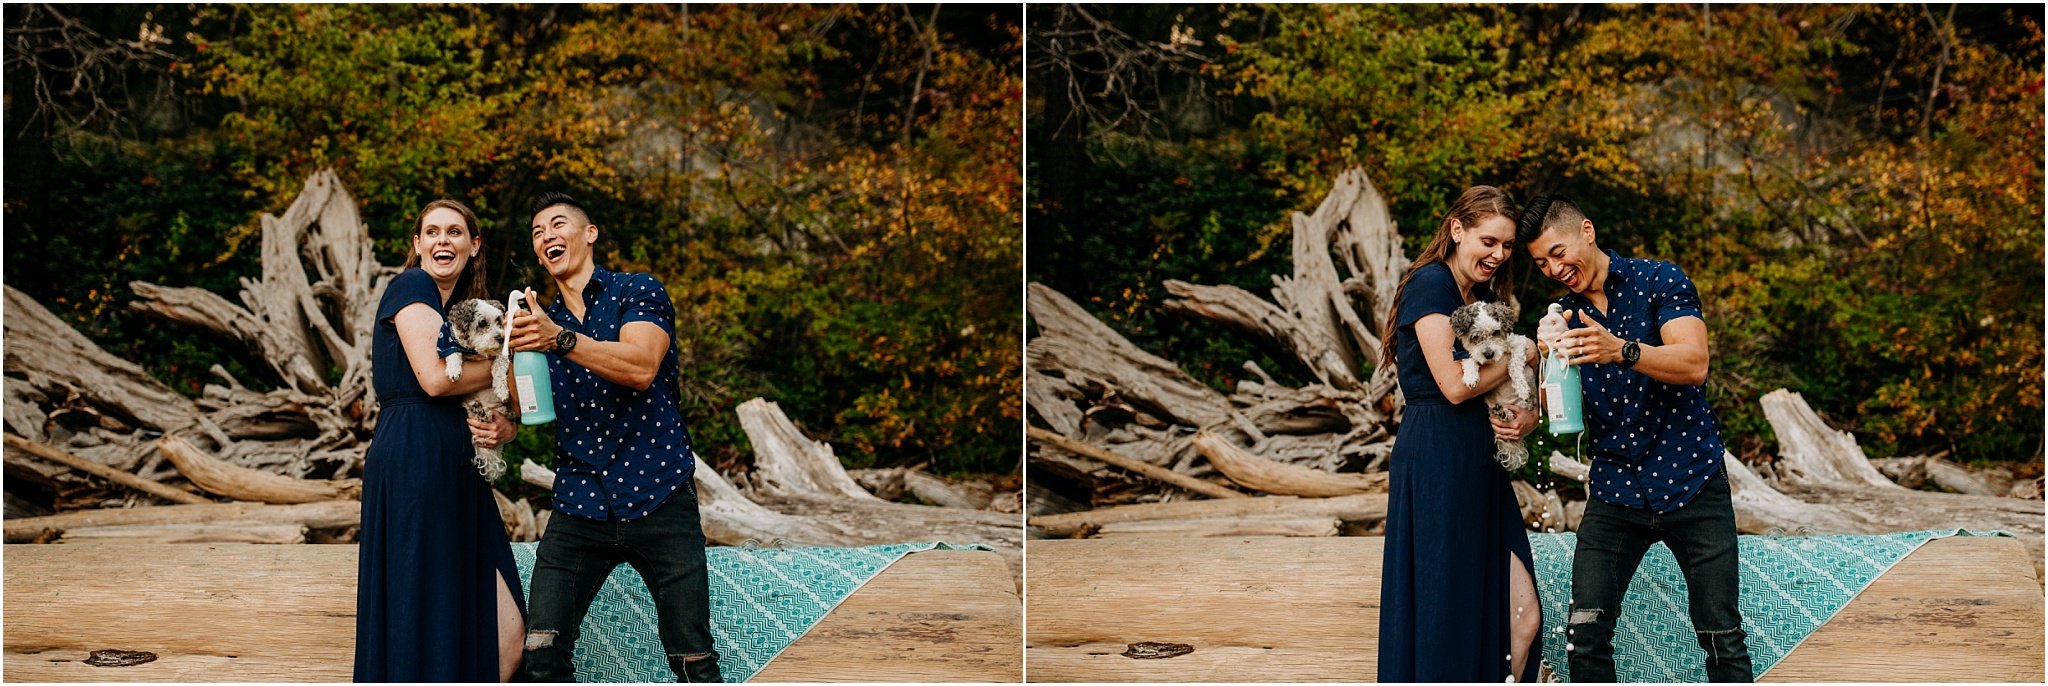 couple popping champagne together engagement session lighthouse park west vancouver bc